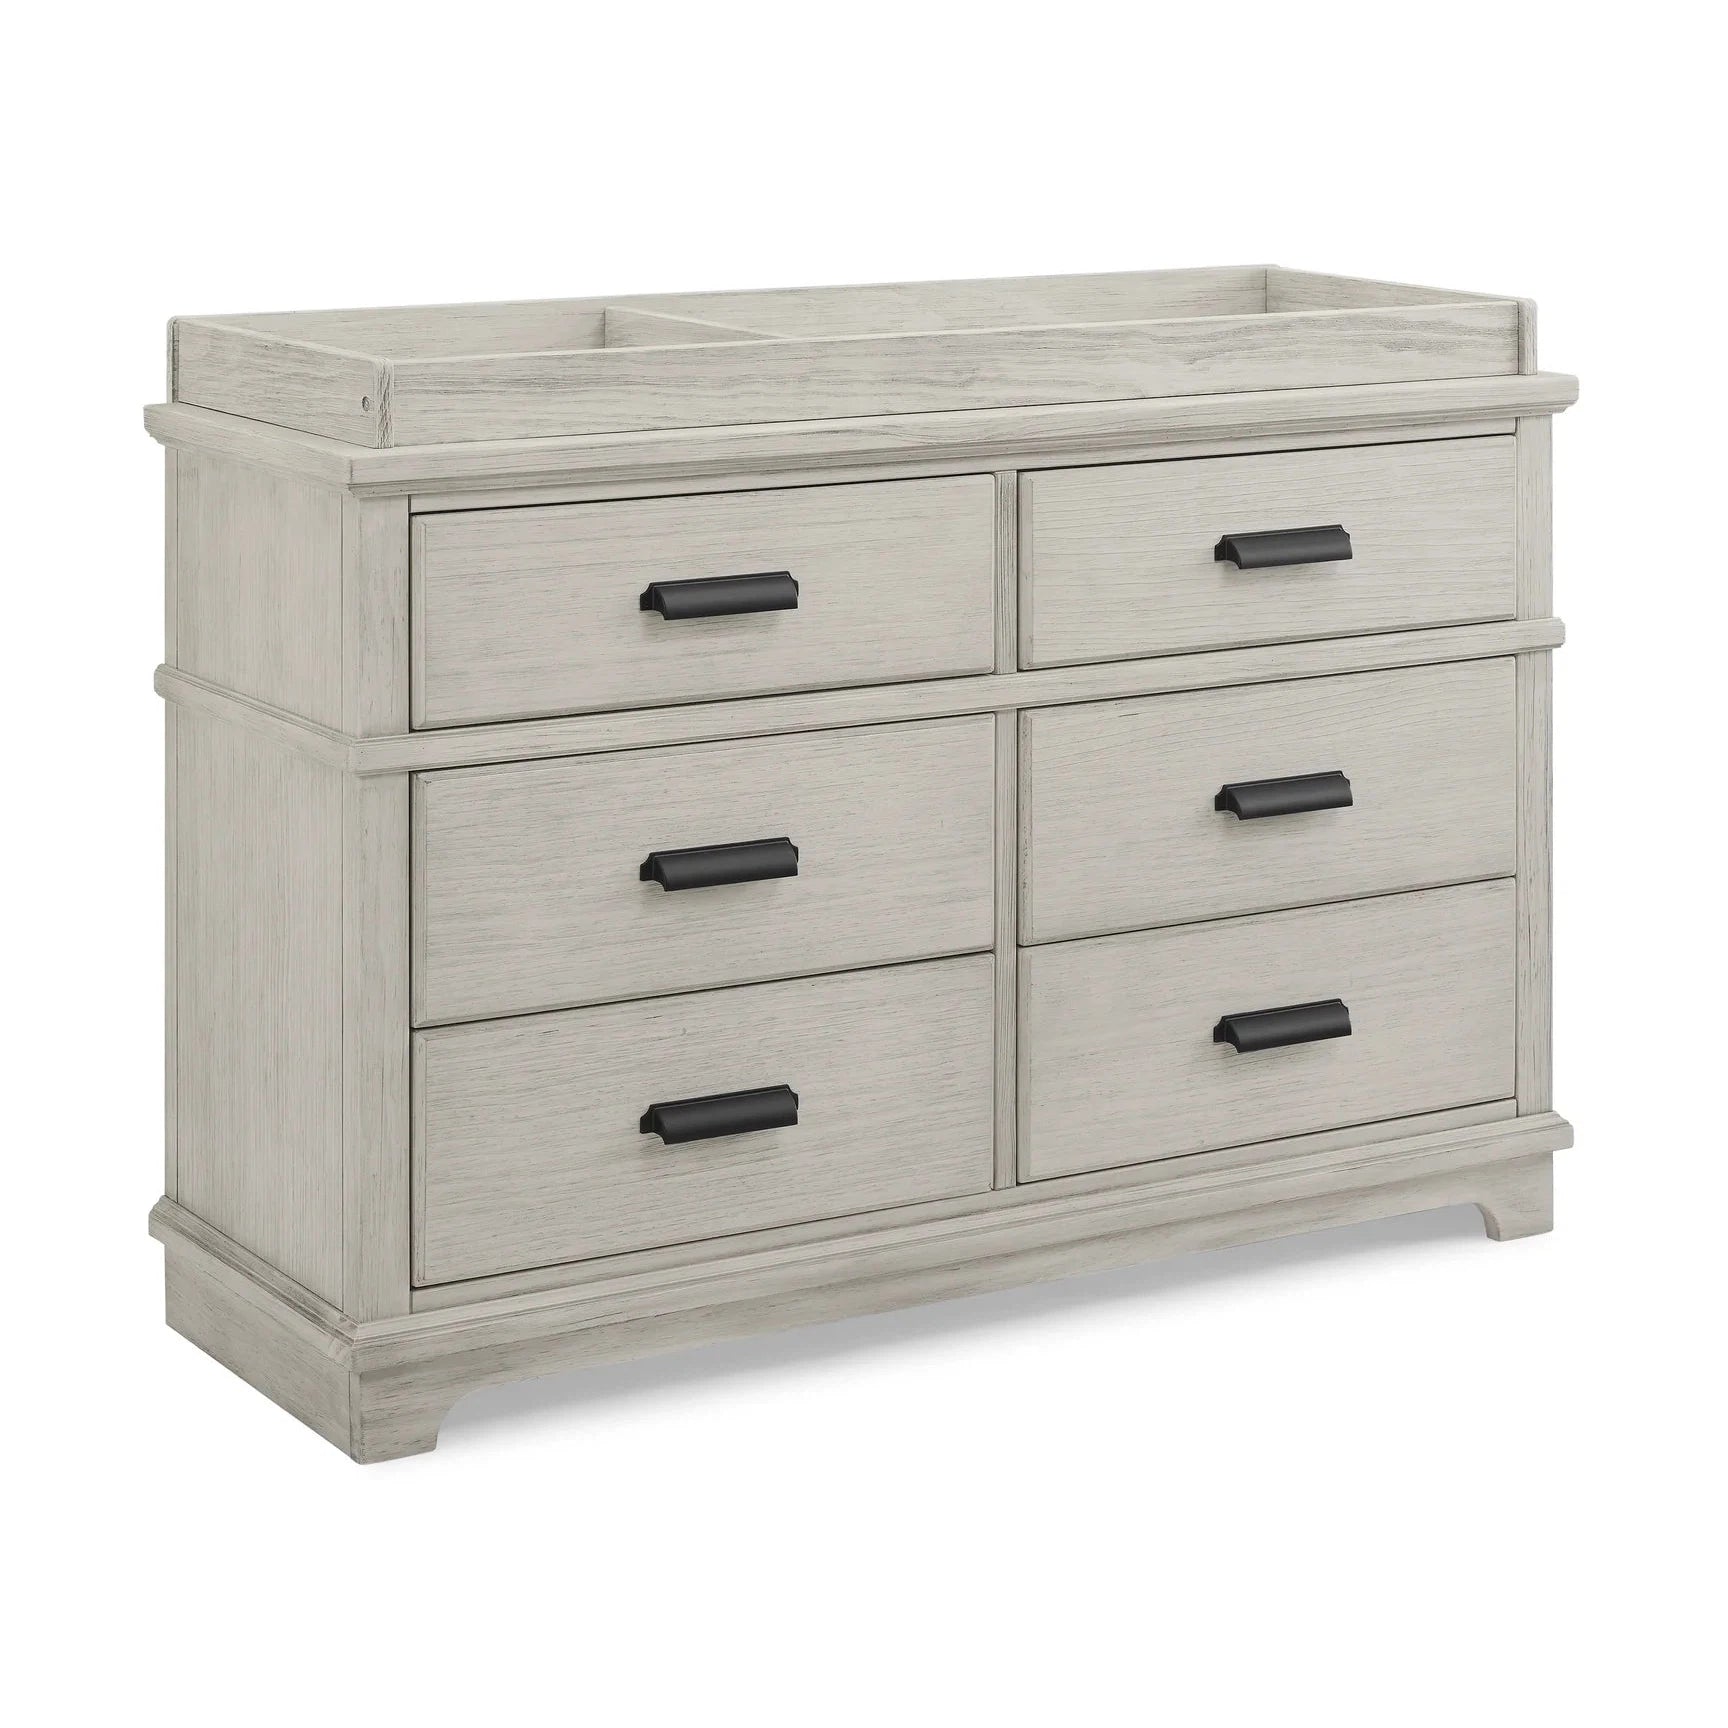 Simmons Kids Asher 6 Drawer Dresser with Change Top Tray - Rustic Mist-DELTA-Little Giant Kidz